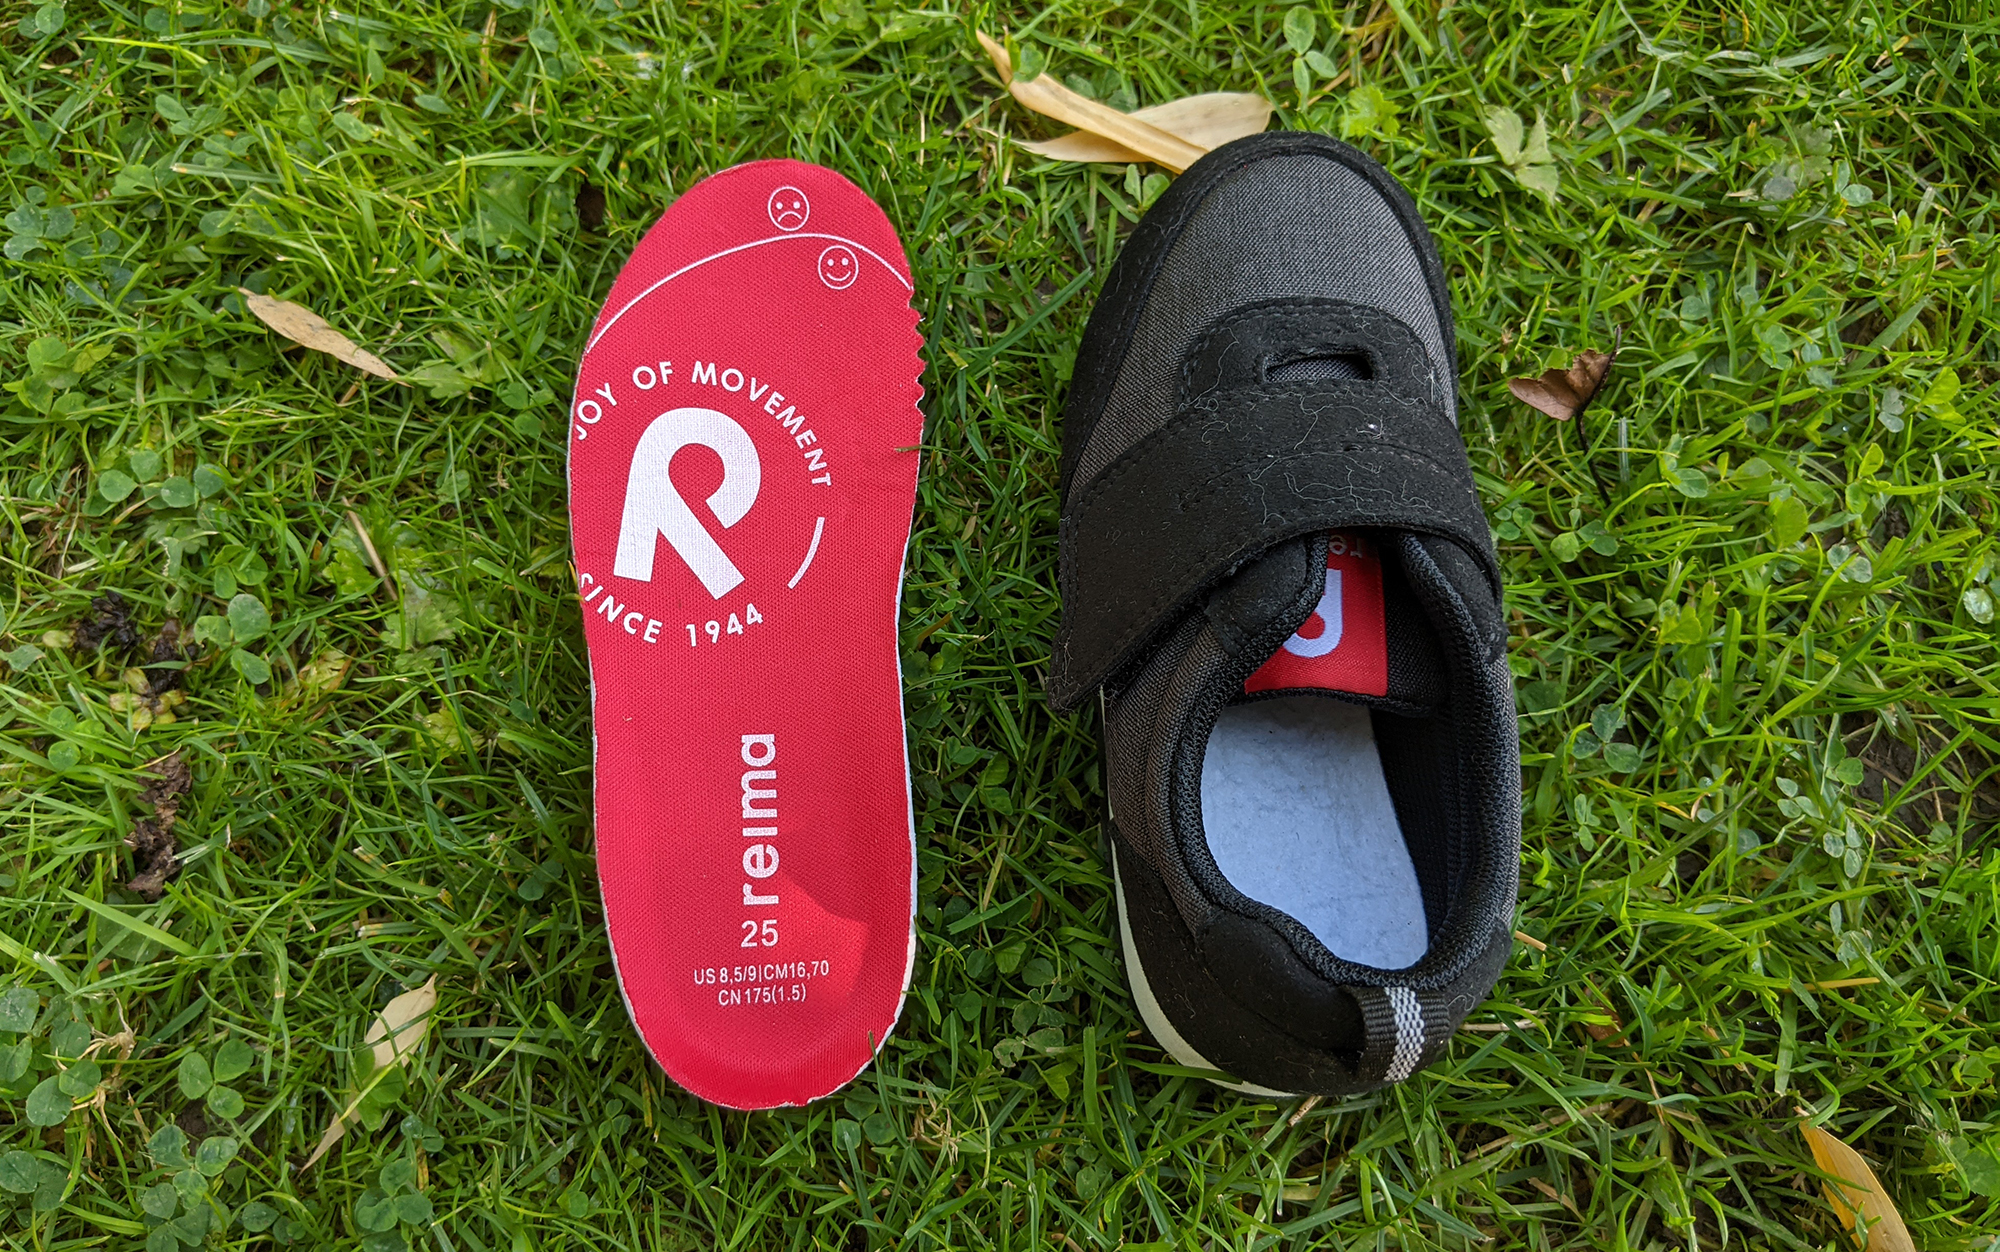 The removable sole of the Reima Evastes can help you determine if it’s the right size before you try to squash it on your kid’s foot.